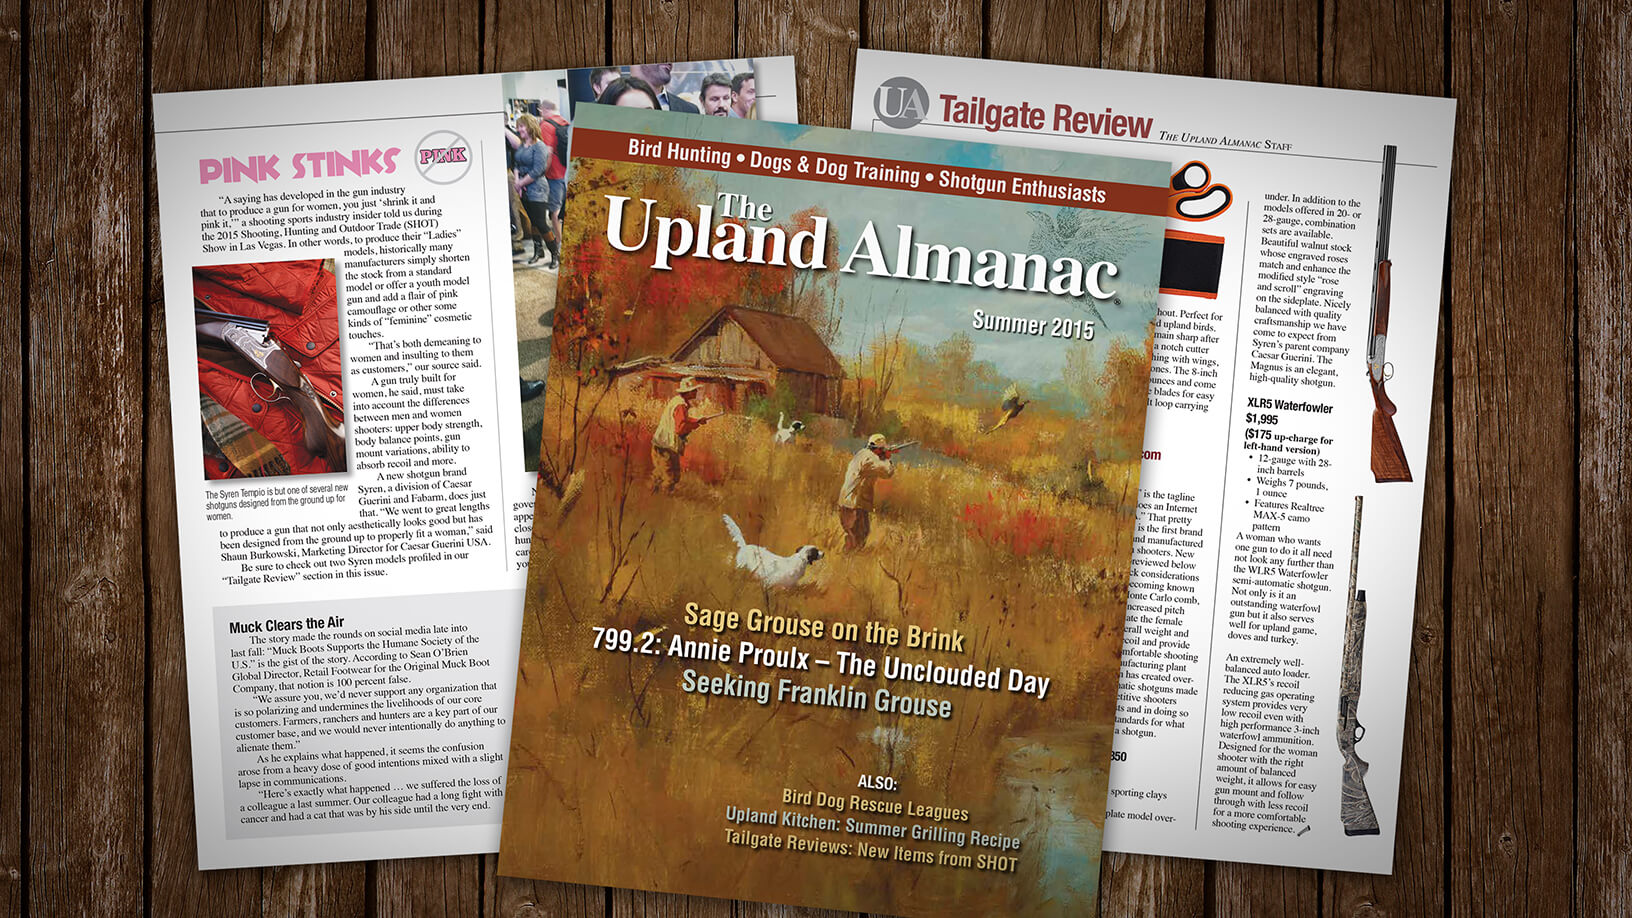 [Upland Almanac: 05.15] Pink Stinks / Tailgate Review